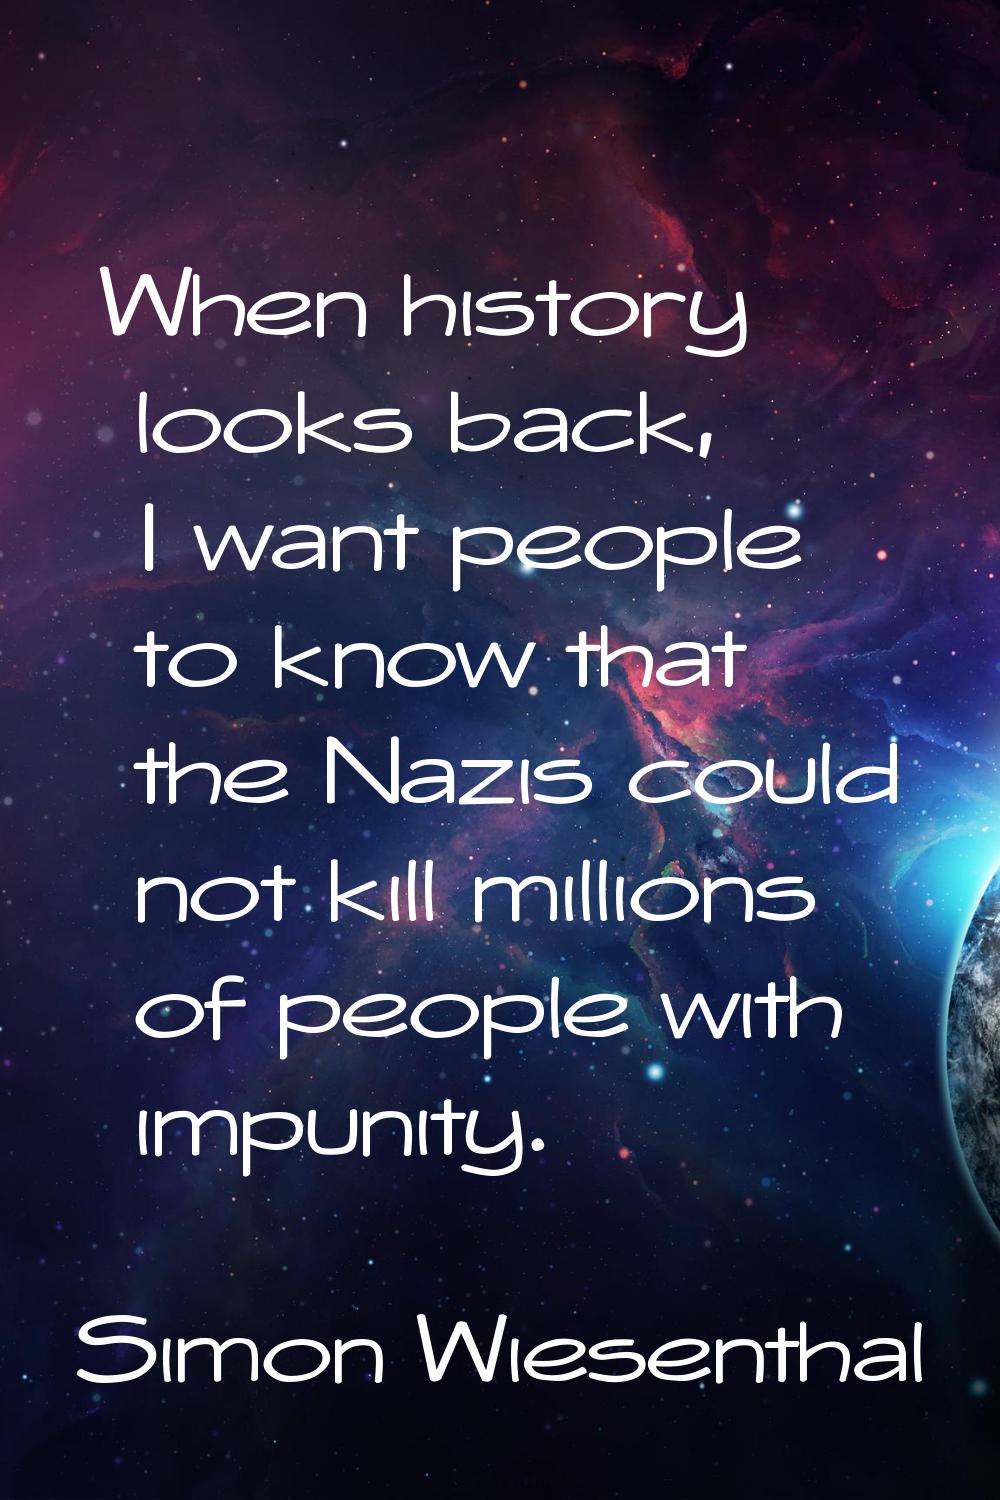 When history looks back, I want people to know that the Nazis could not kill millions of people wit